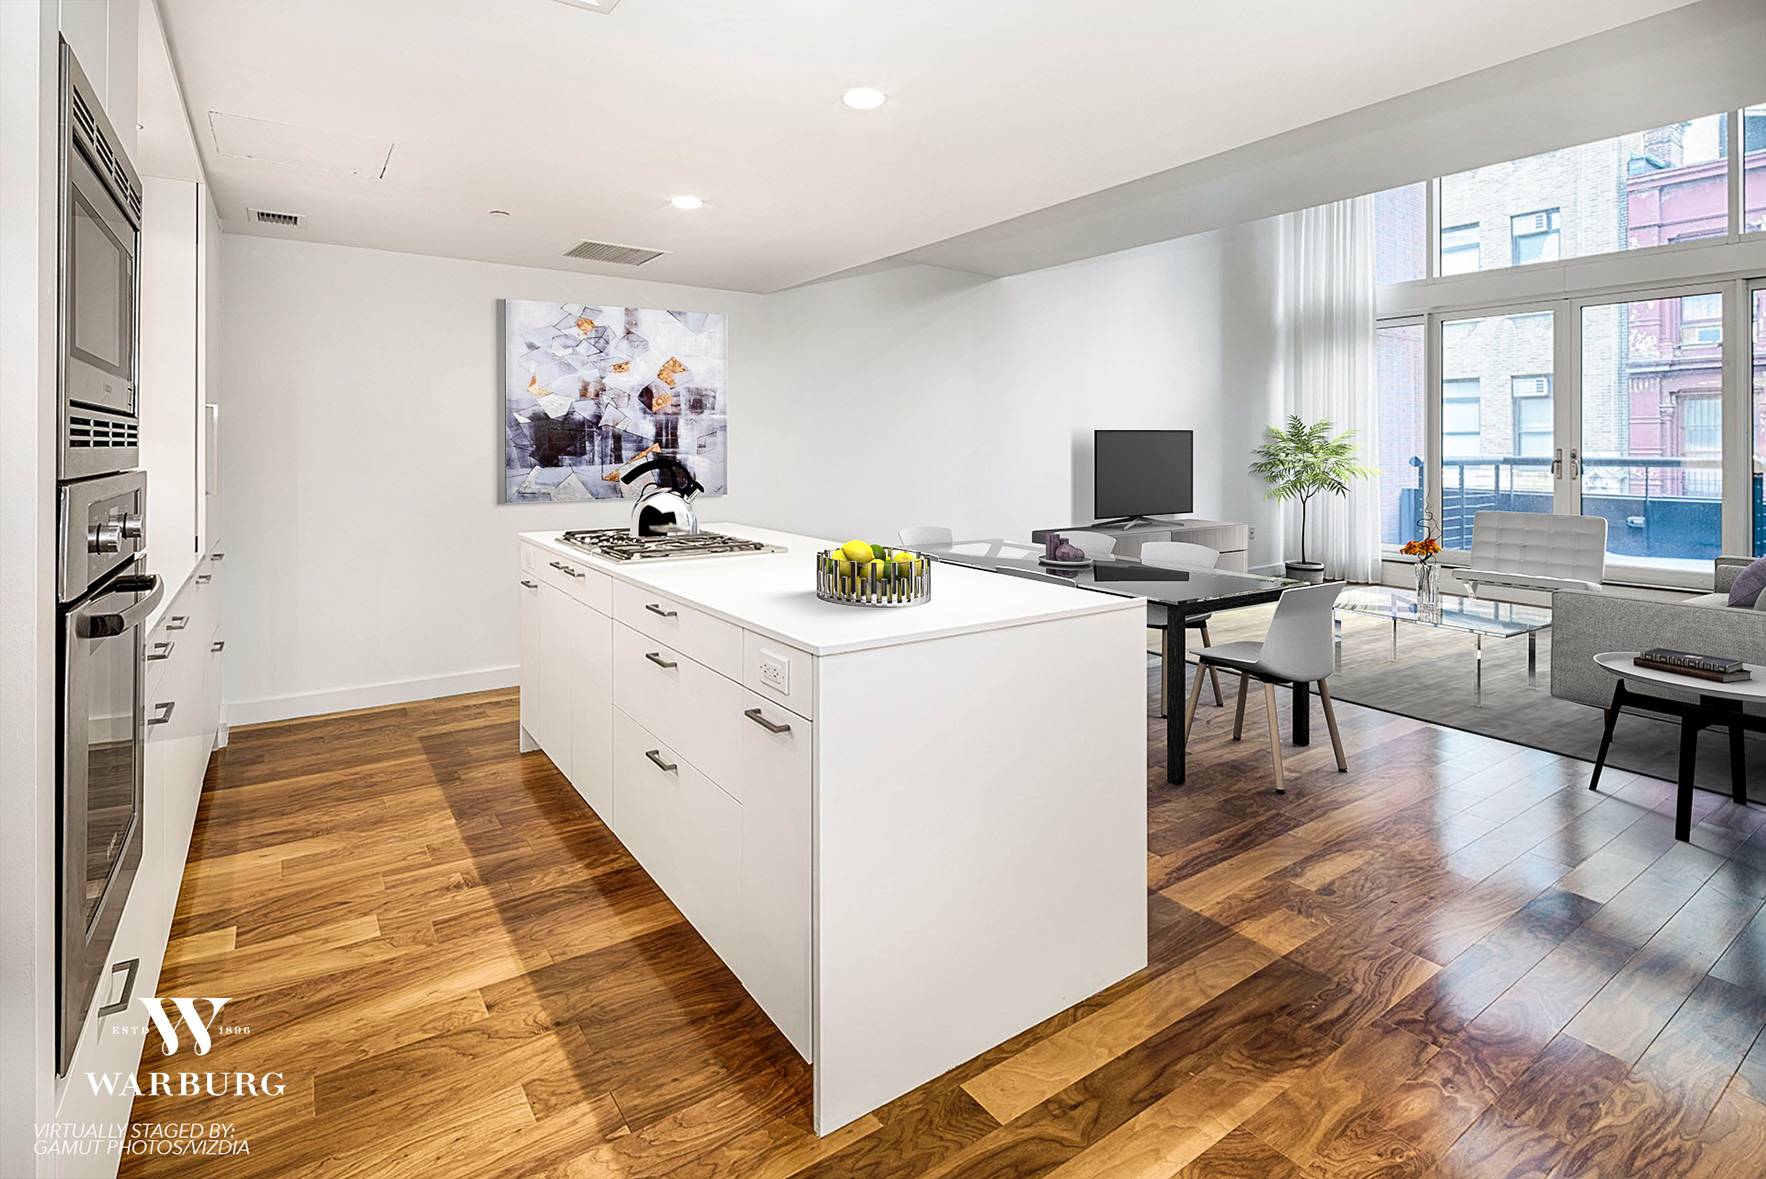 Residence 8D at 84 White Street in the heart of Tribeca is a bright and well appointed 1BR 1.